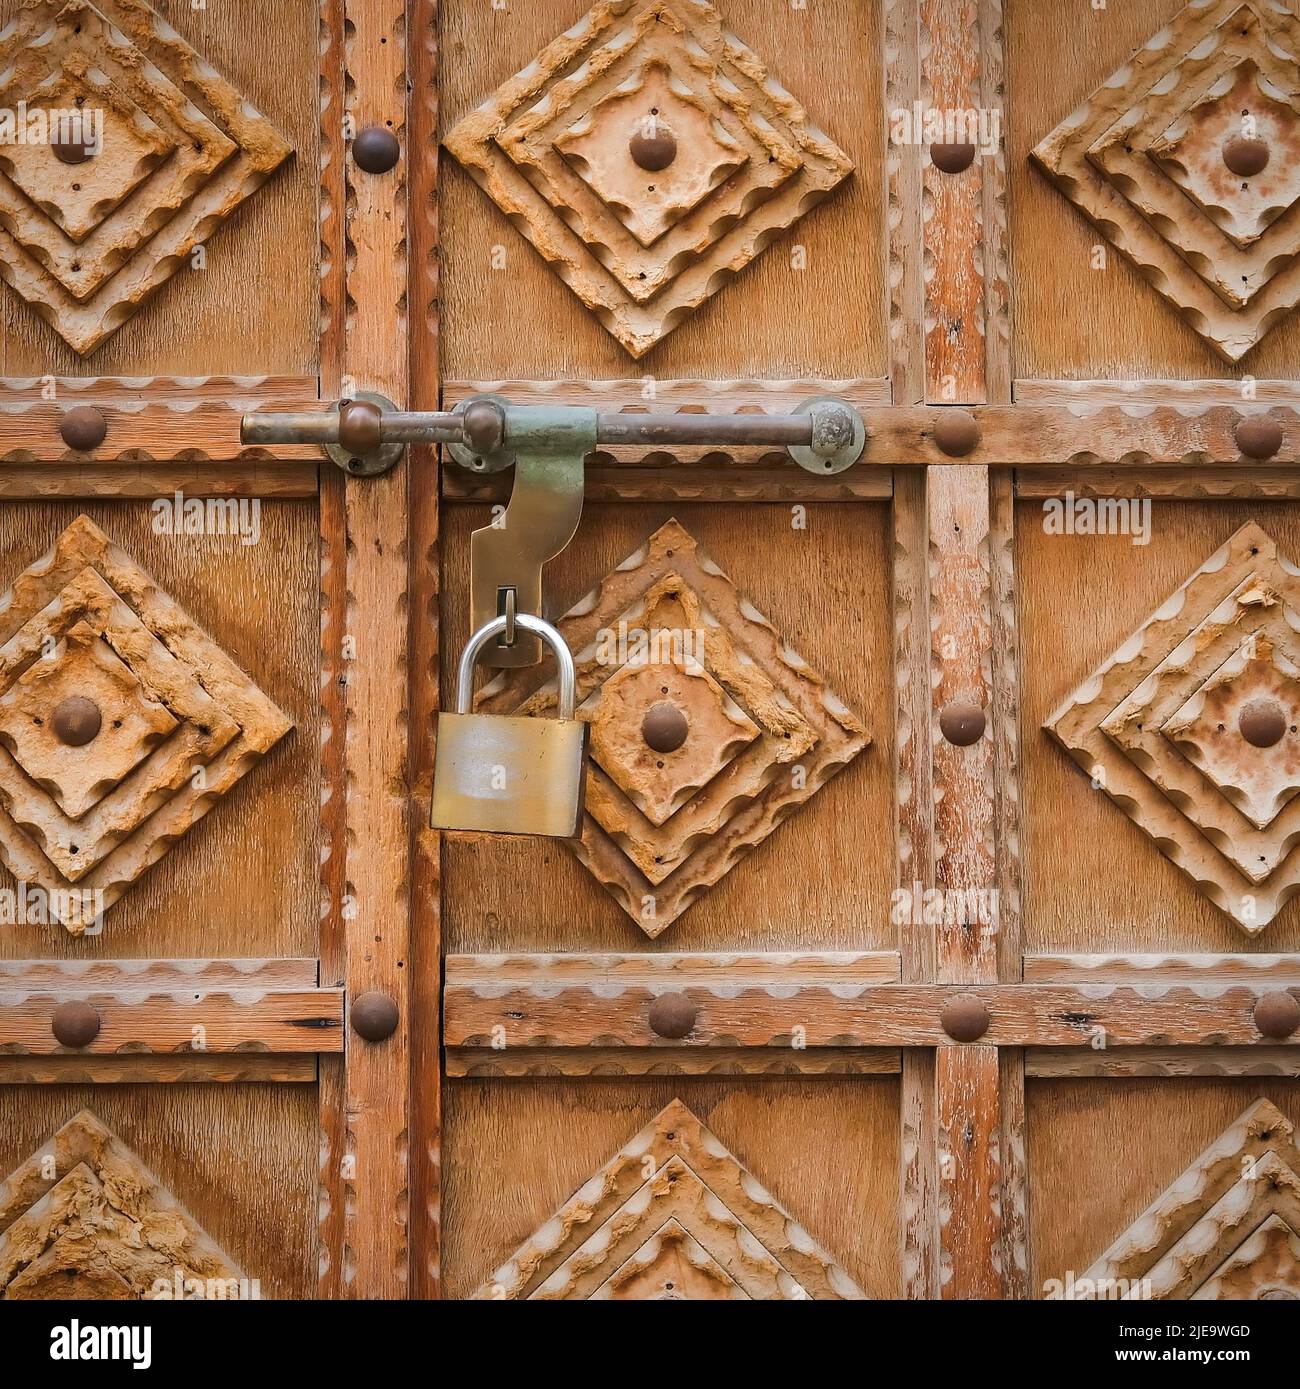 Fragment of minimalist wood carving design on antique timber gate. Vintage wooden entrance door with padlock Stock Photo